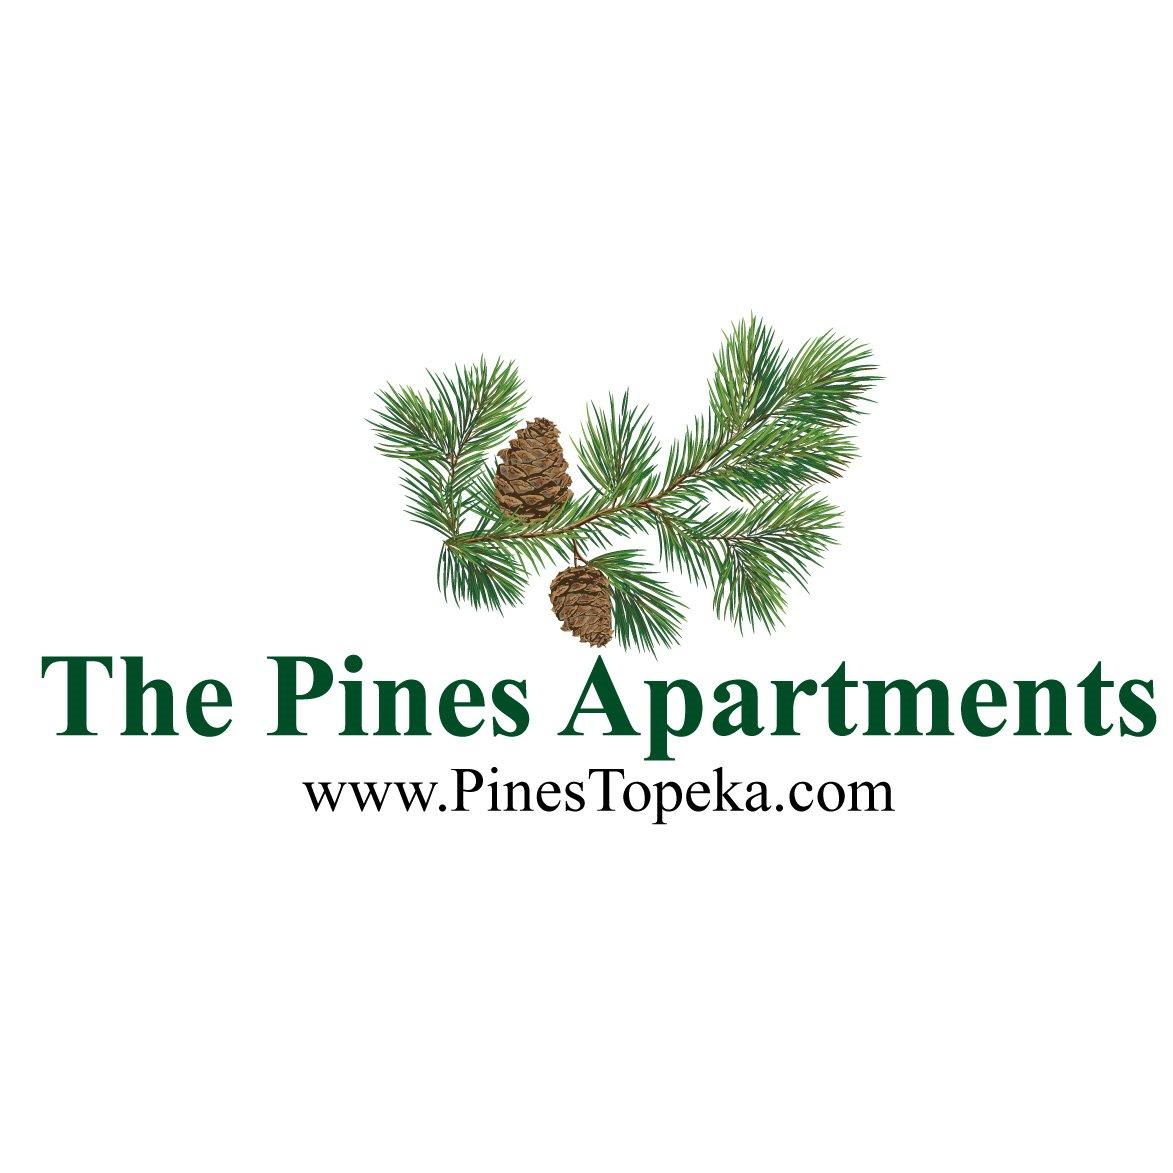 The Pines Apartments Logo